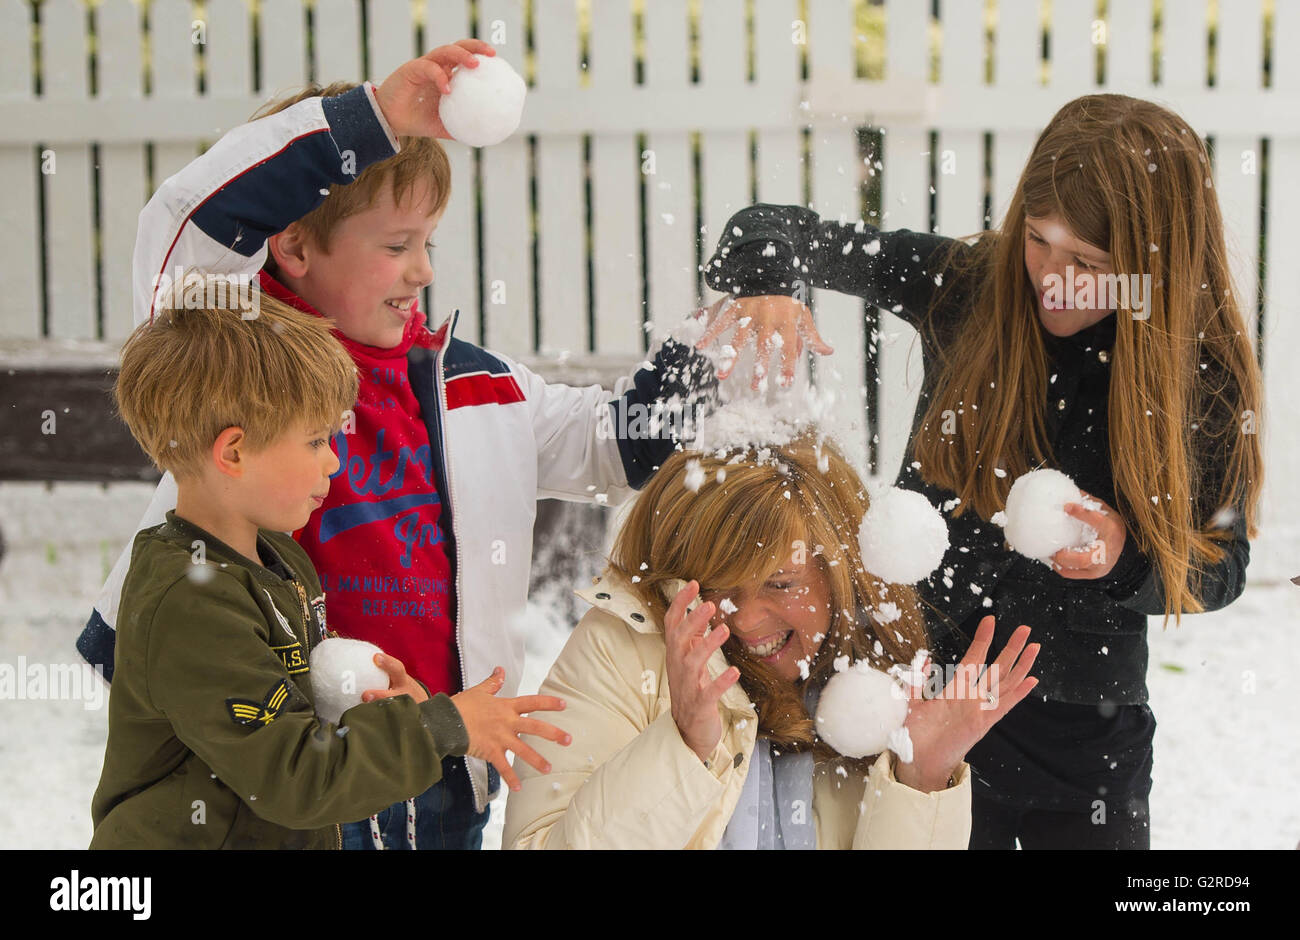 EDITORIAL USE ONLY Kate Garraway and (left to right) son Billy Draper, godson Monty White, and daughter Darcey Draper play in the snow at London's Cavendish Square to celebrate Disney On Ice presents Frozen coming to the UK. Stock Photo